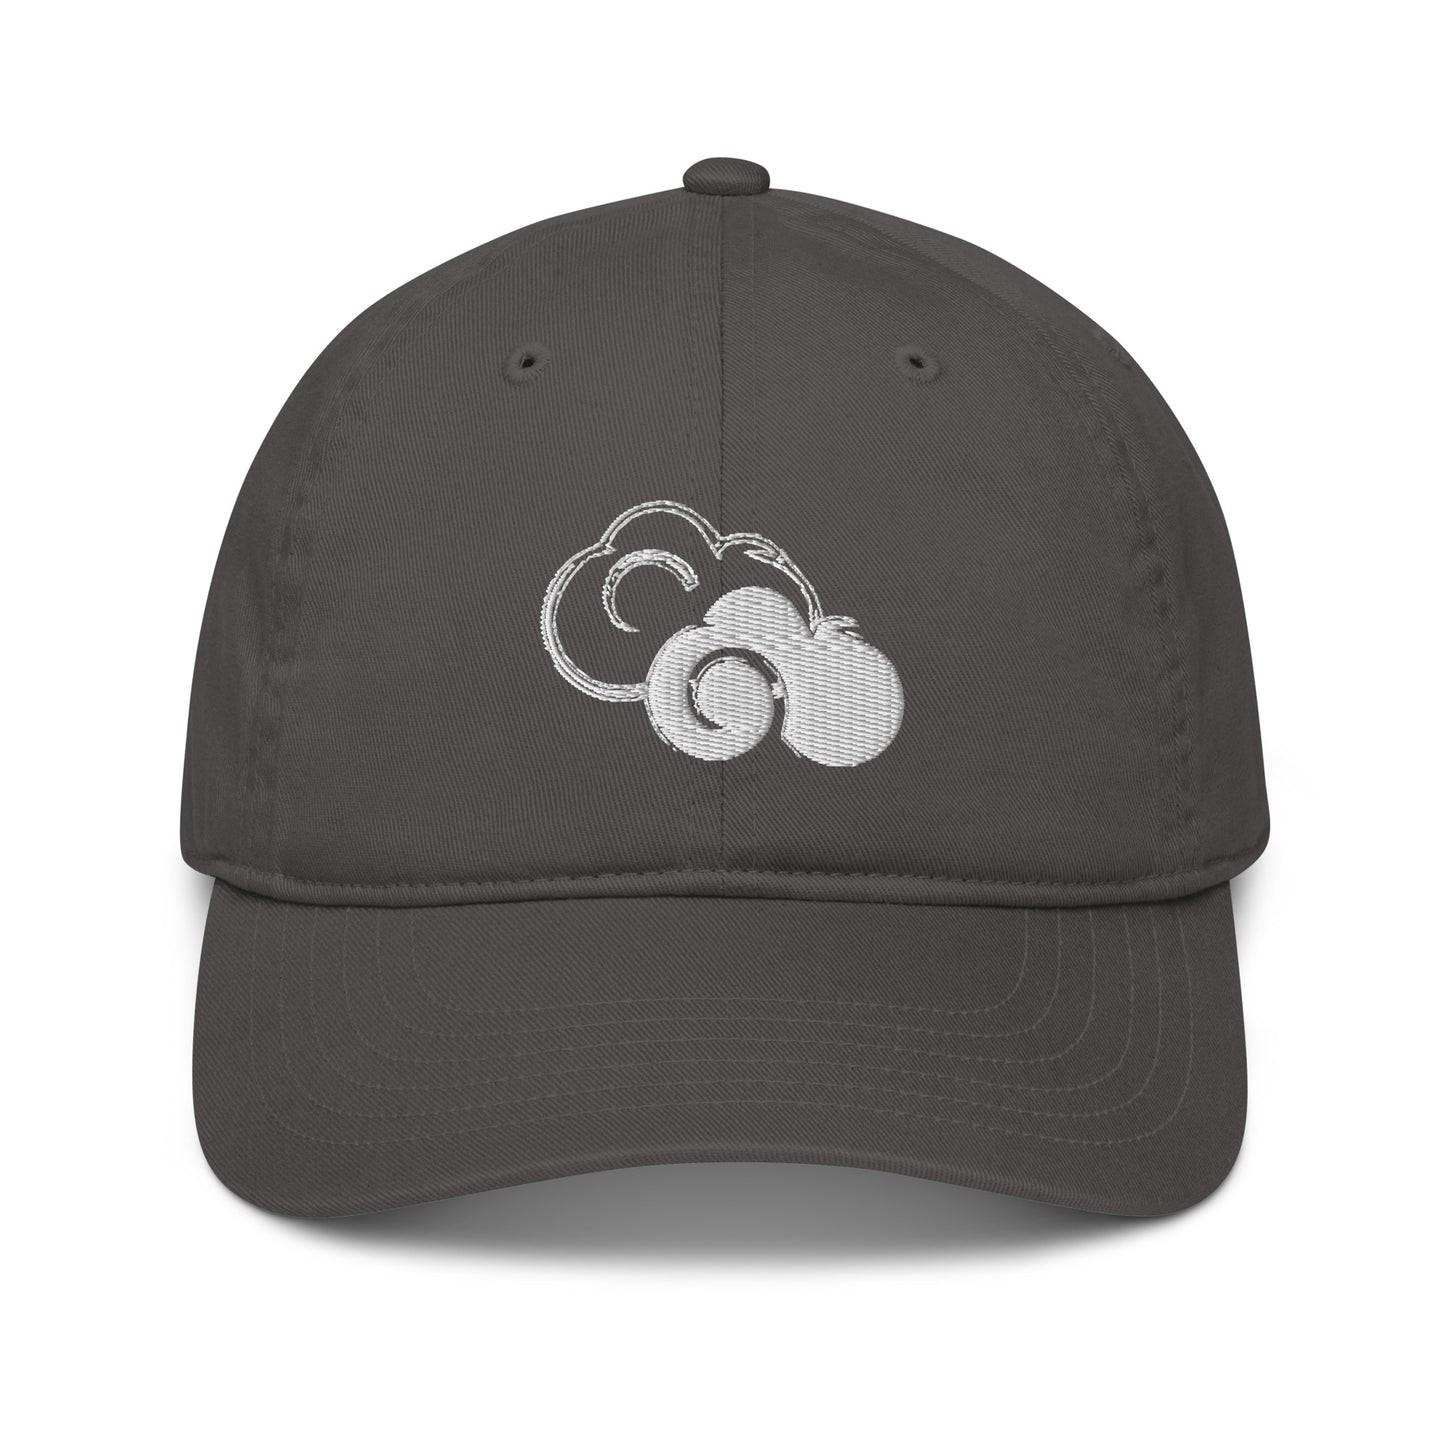 Our Zen Clouds Organic Dad Hat